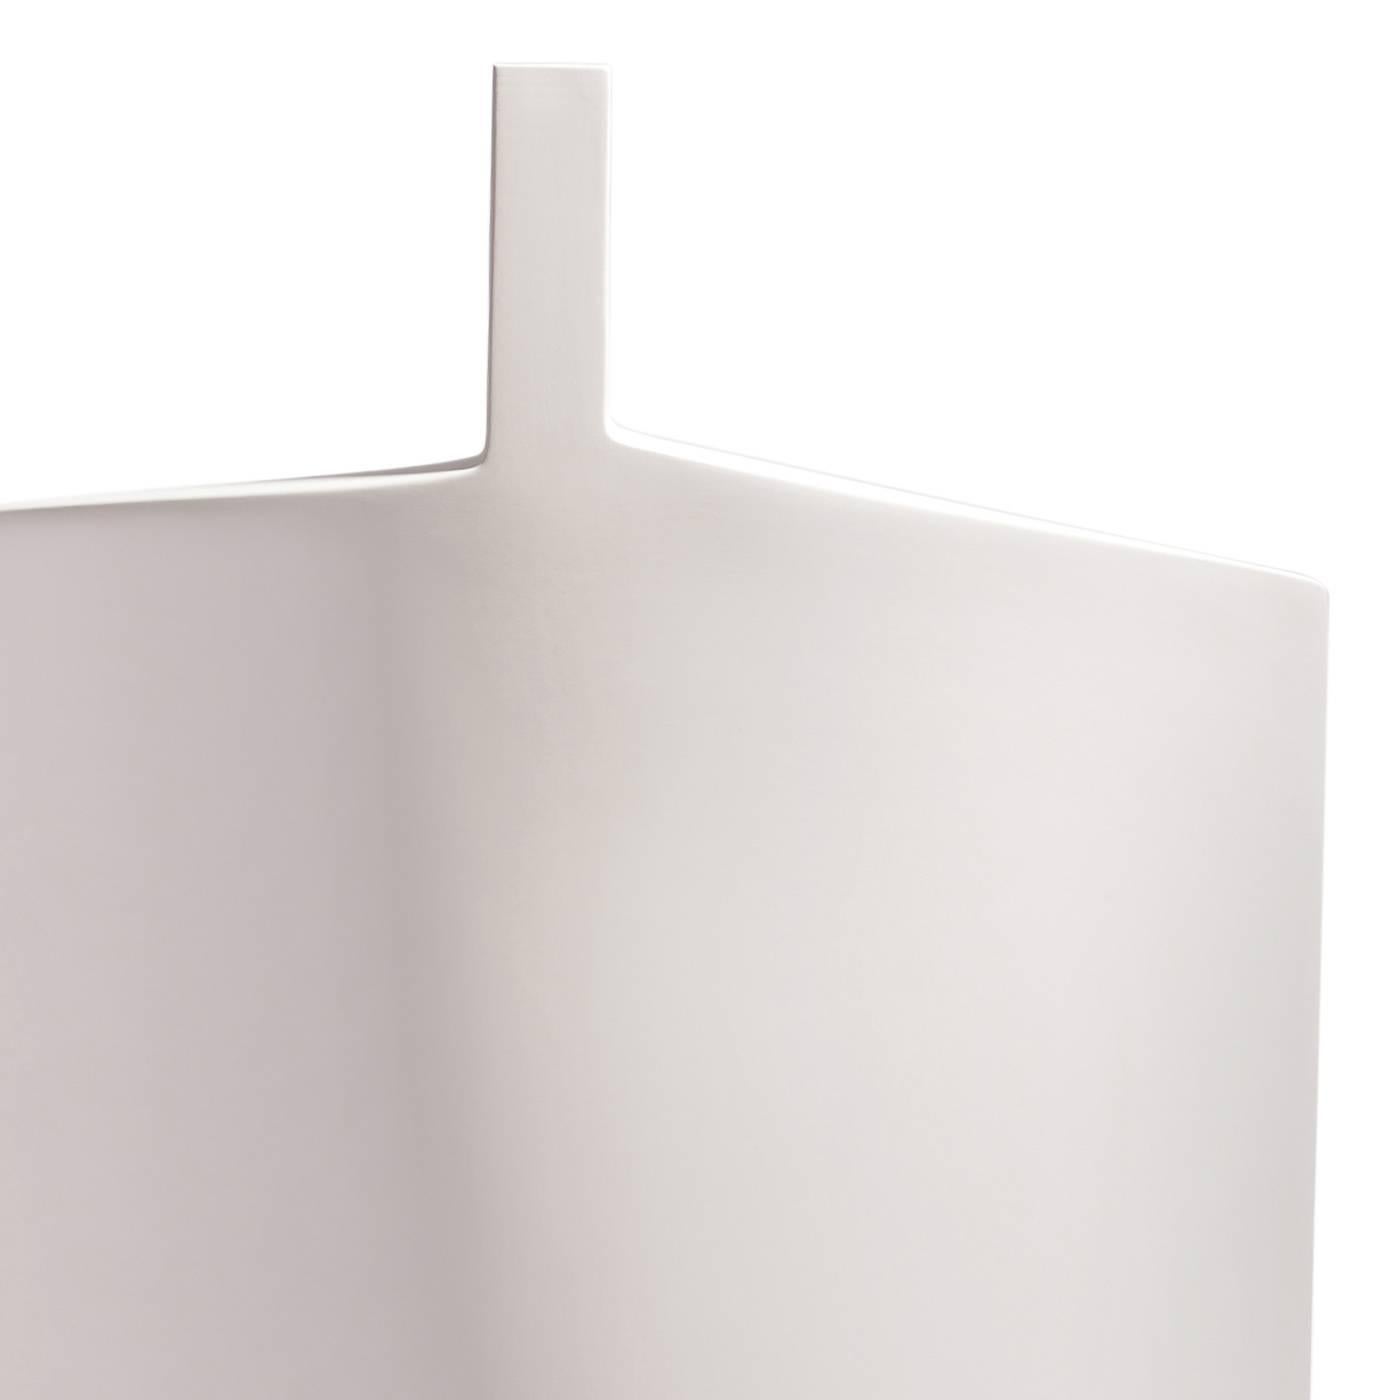 This elegant vase in ceramic was hand-painted in white and features a modern silhouette that mixes smooth texture, a sinuous front profile, and sharp angles that make the shape of its top and neck. Traditional techniques and materials coexist with